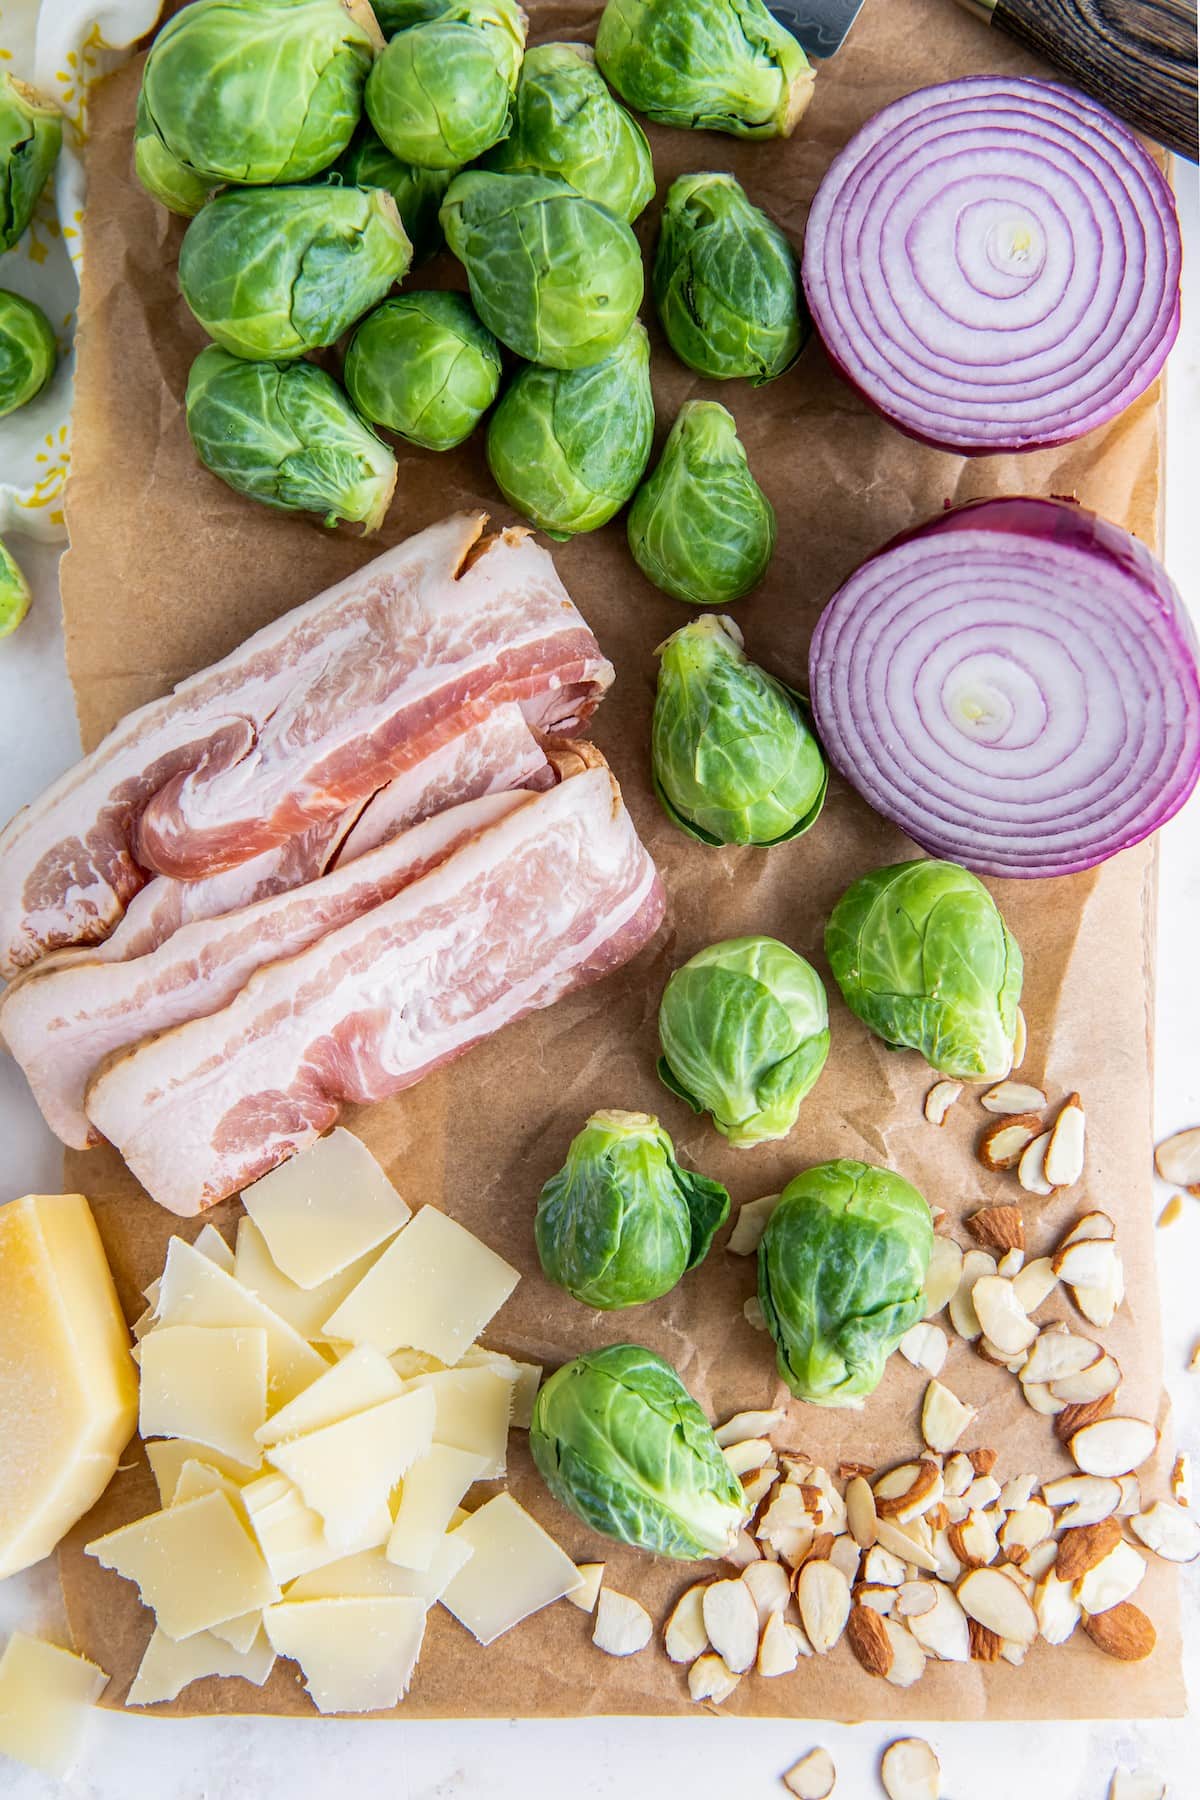 Ingredients for shaved brussels sprouts salad with bacon.